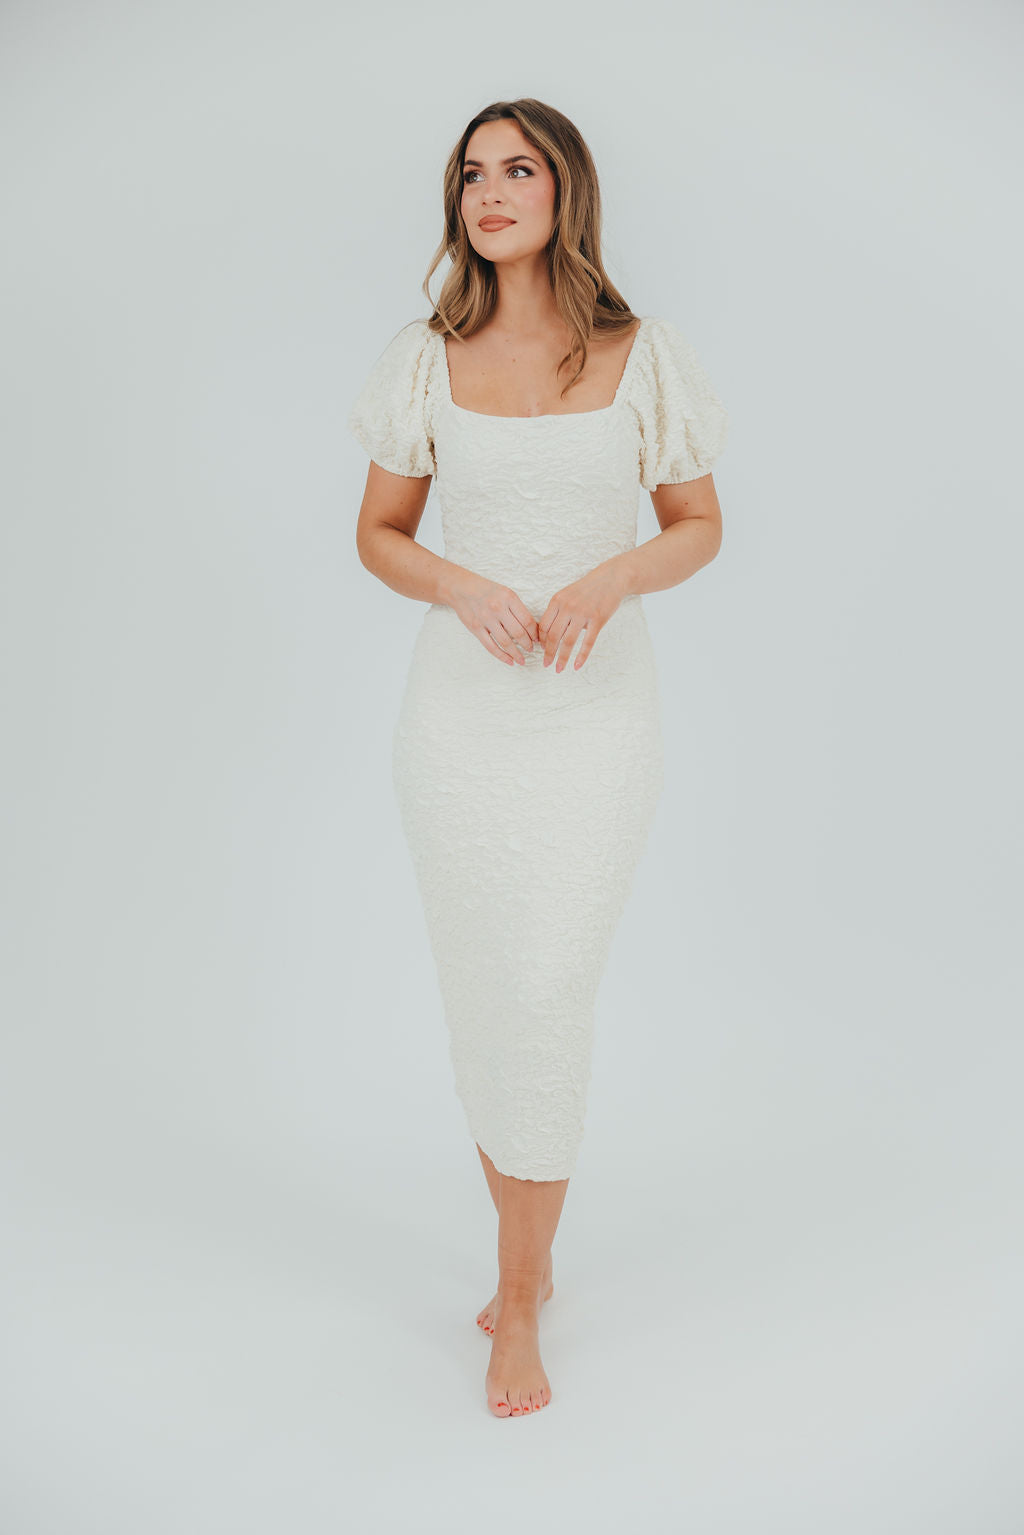 Blakeley Textured Midi Dress in Ivory - Bump Friendly & Inclusive Sizing (S-3XL) - Pre-Order 5/15 $20 OFF